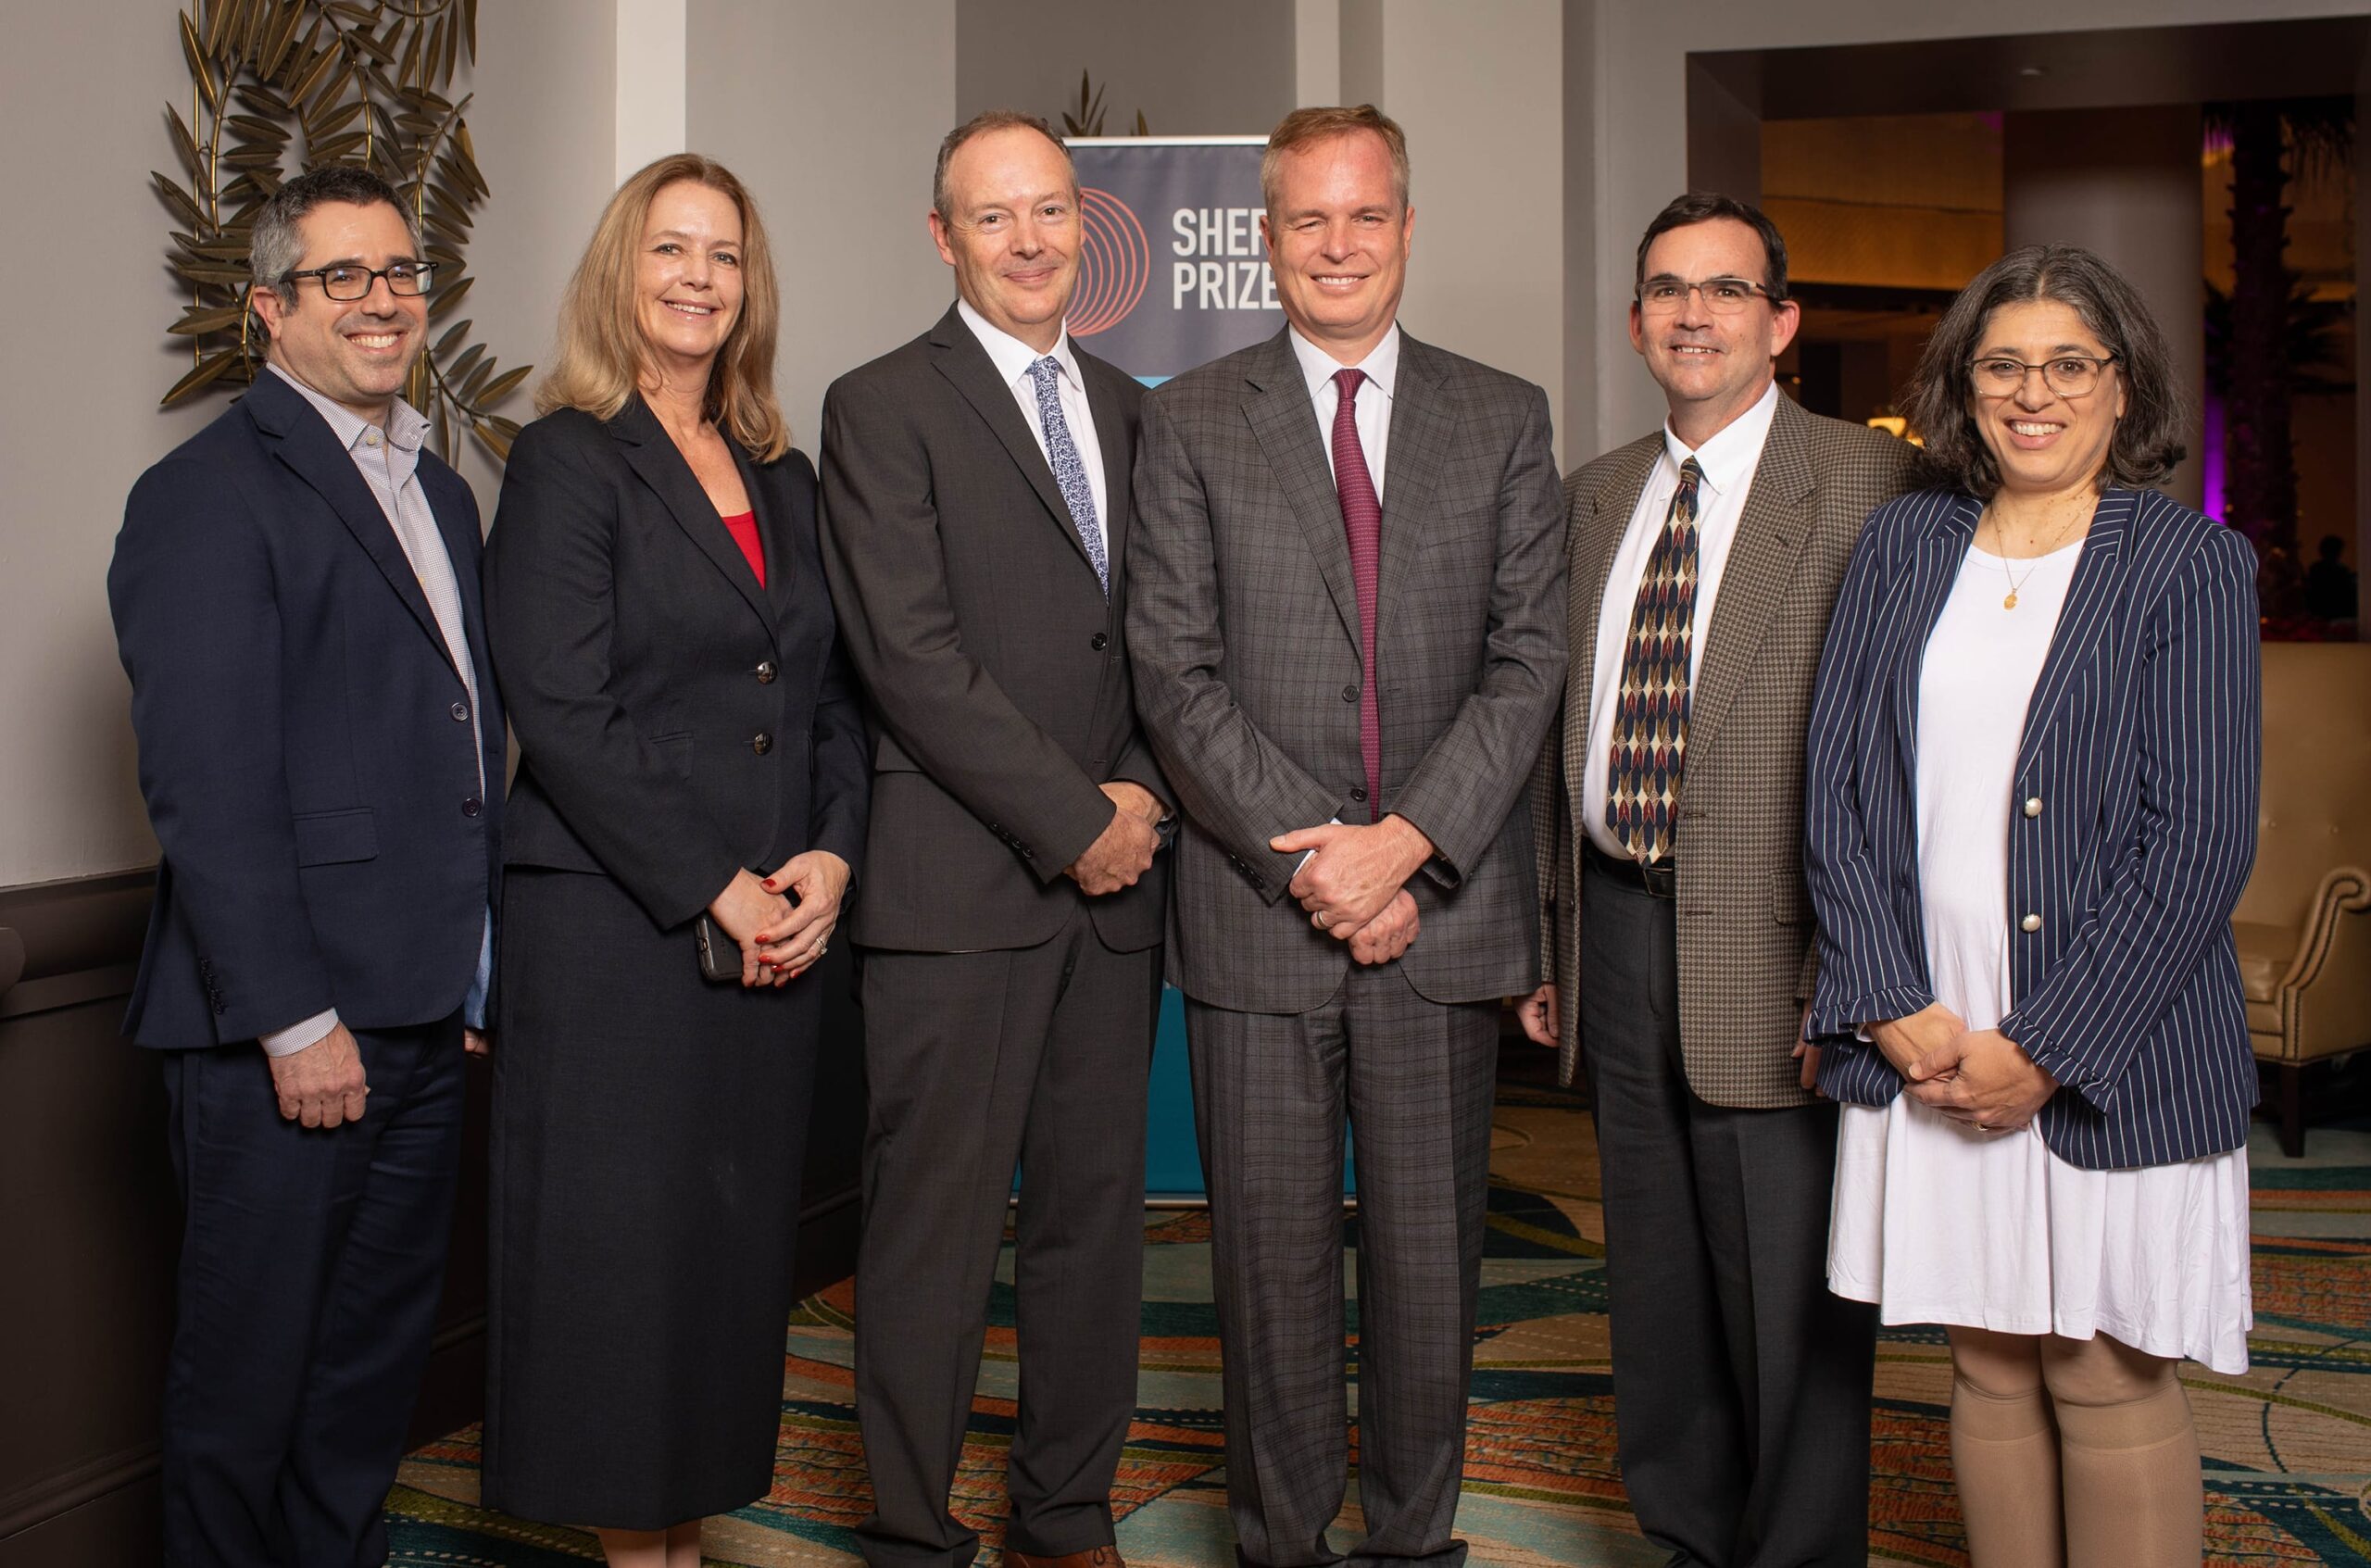 <p>2019 Selection Committee with 2019 Sherman Prize Recipient Dr. William Sandborn</p>
